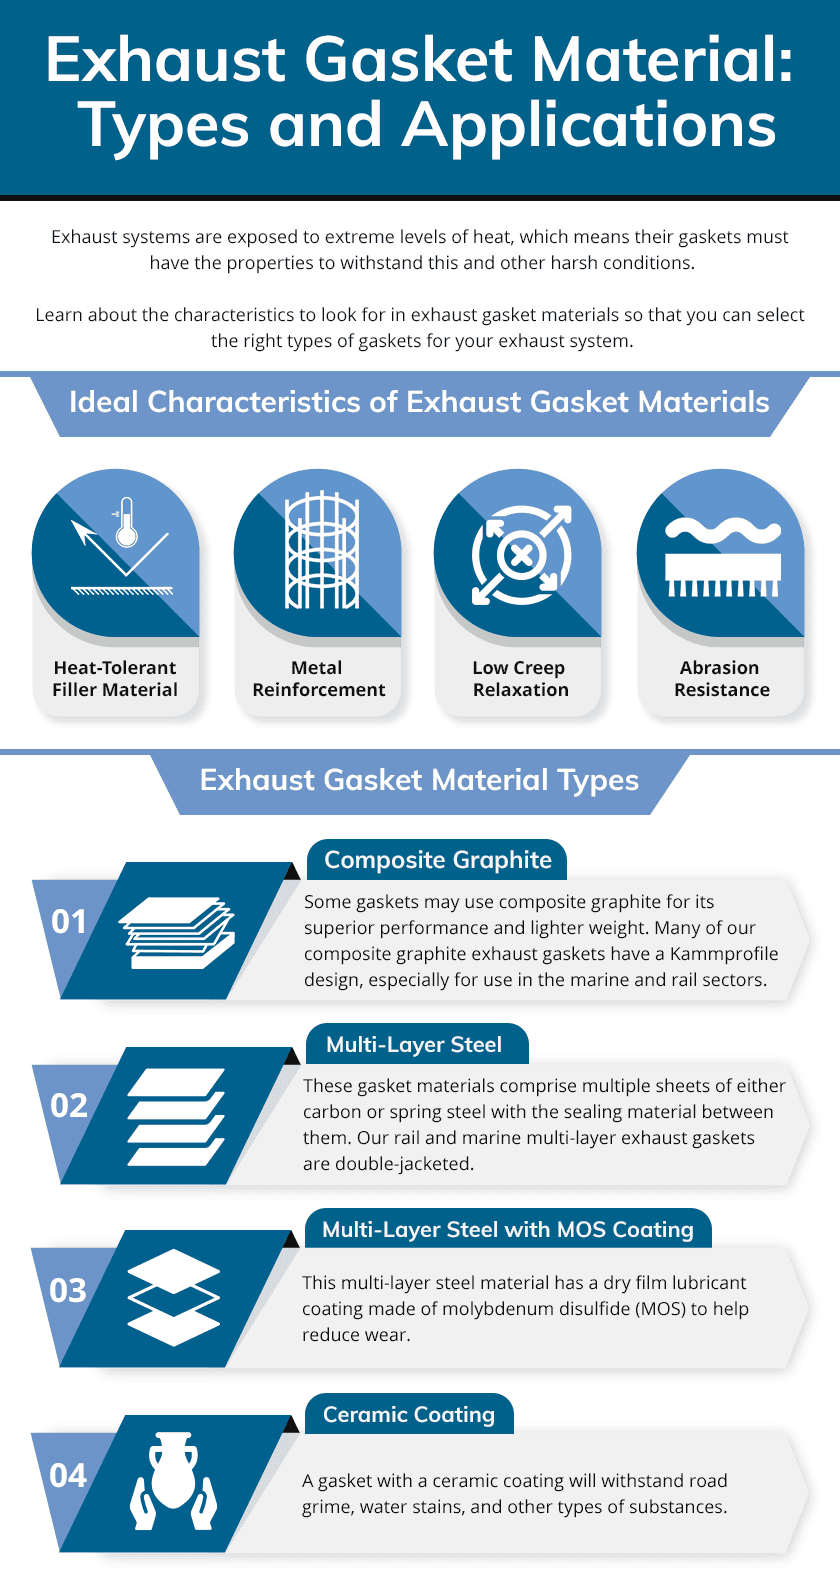 Exhaust Gasket Material: Types and Applications